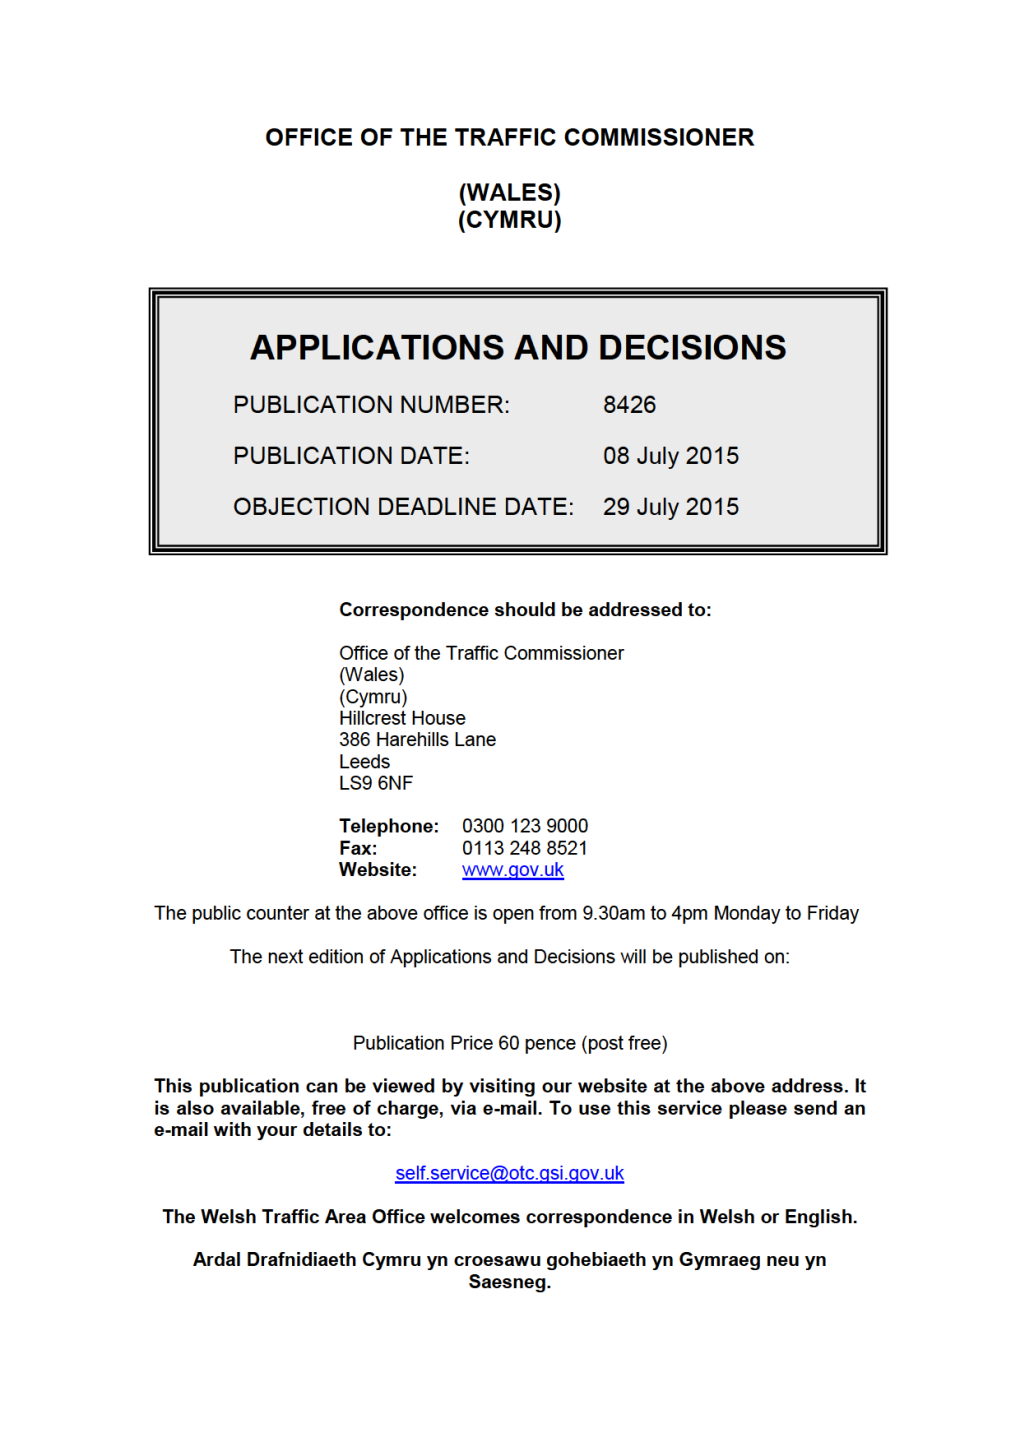 APPLICATIONS and DECISIONS 8 July 2015